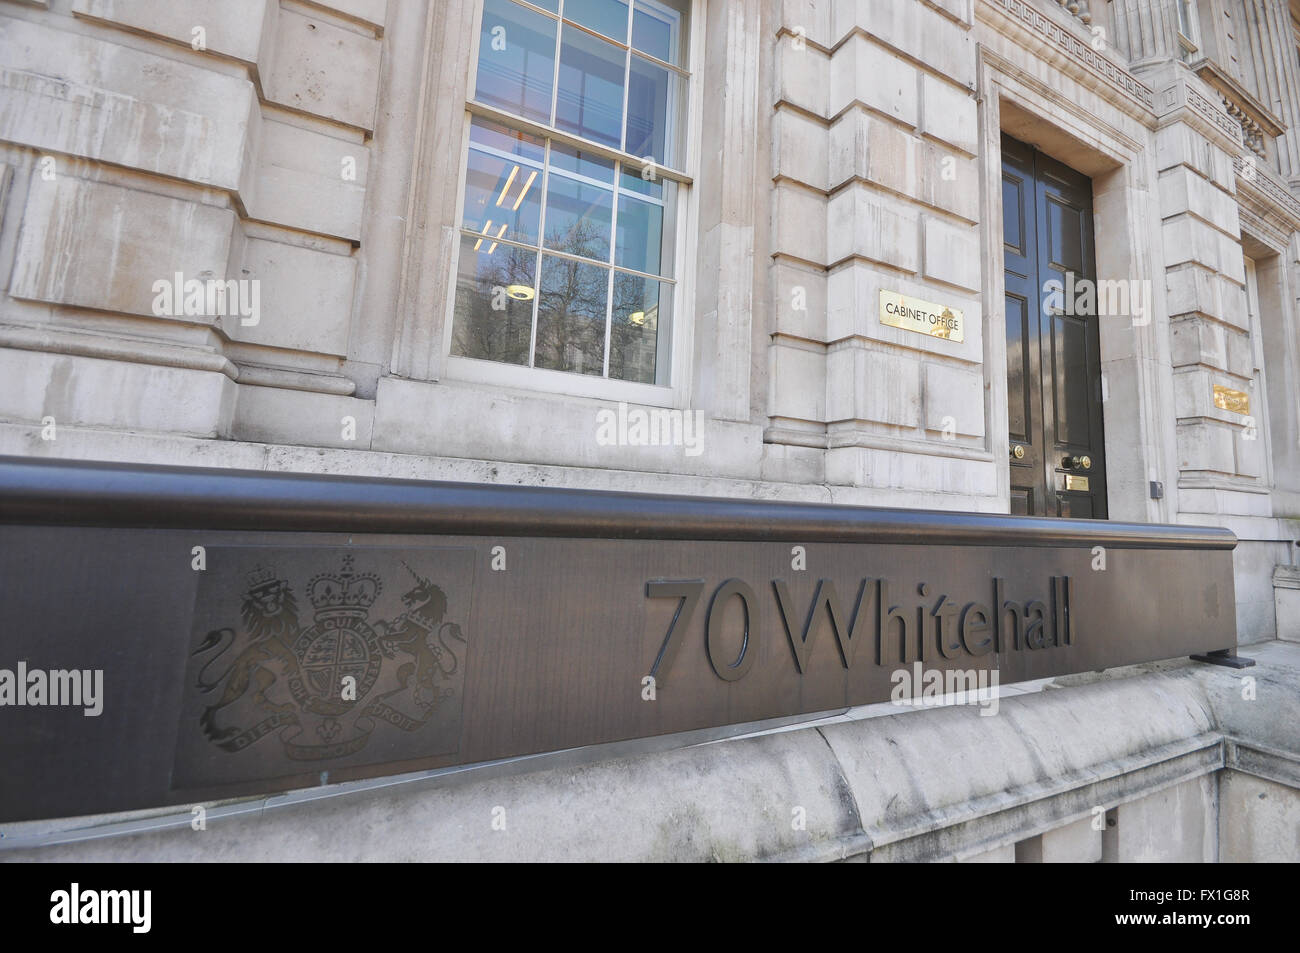 Cabinet Office and 70 Whitehall is a department of the Government of the  United Kingdom. London Stock Photo - Alamy